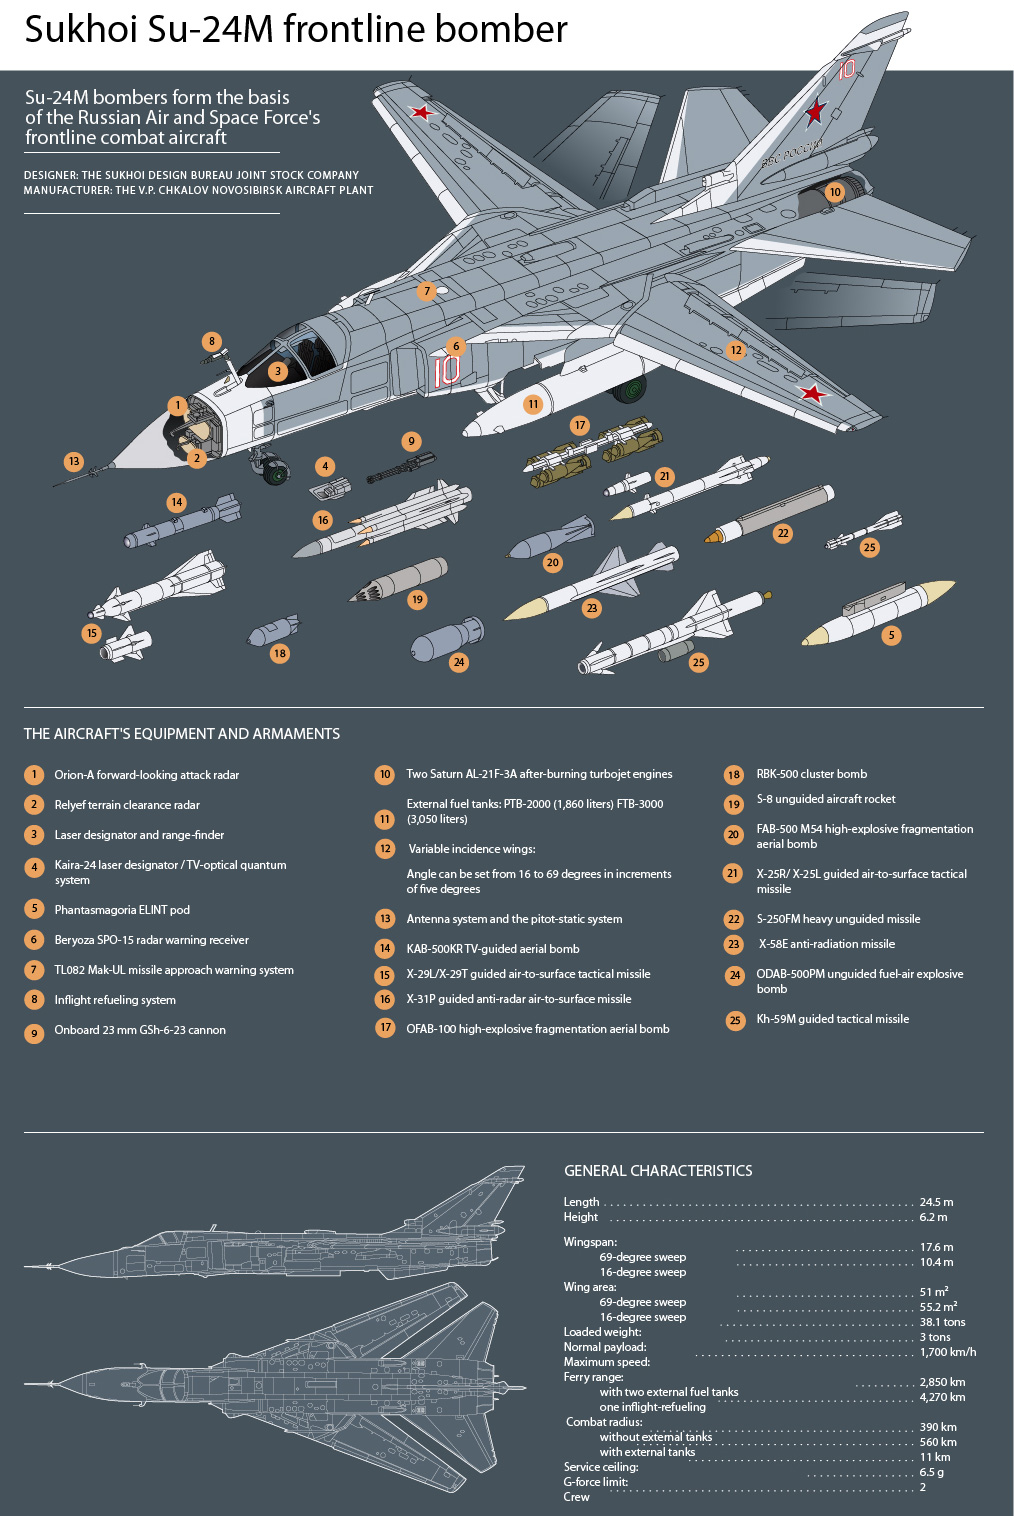 Read more: 10 facts about the Sukhoi Su-24 bomber>>>